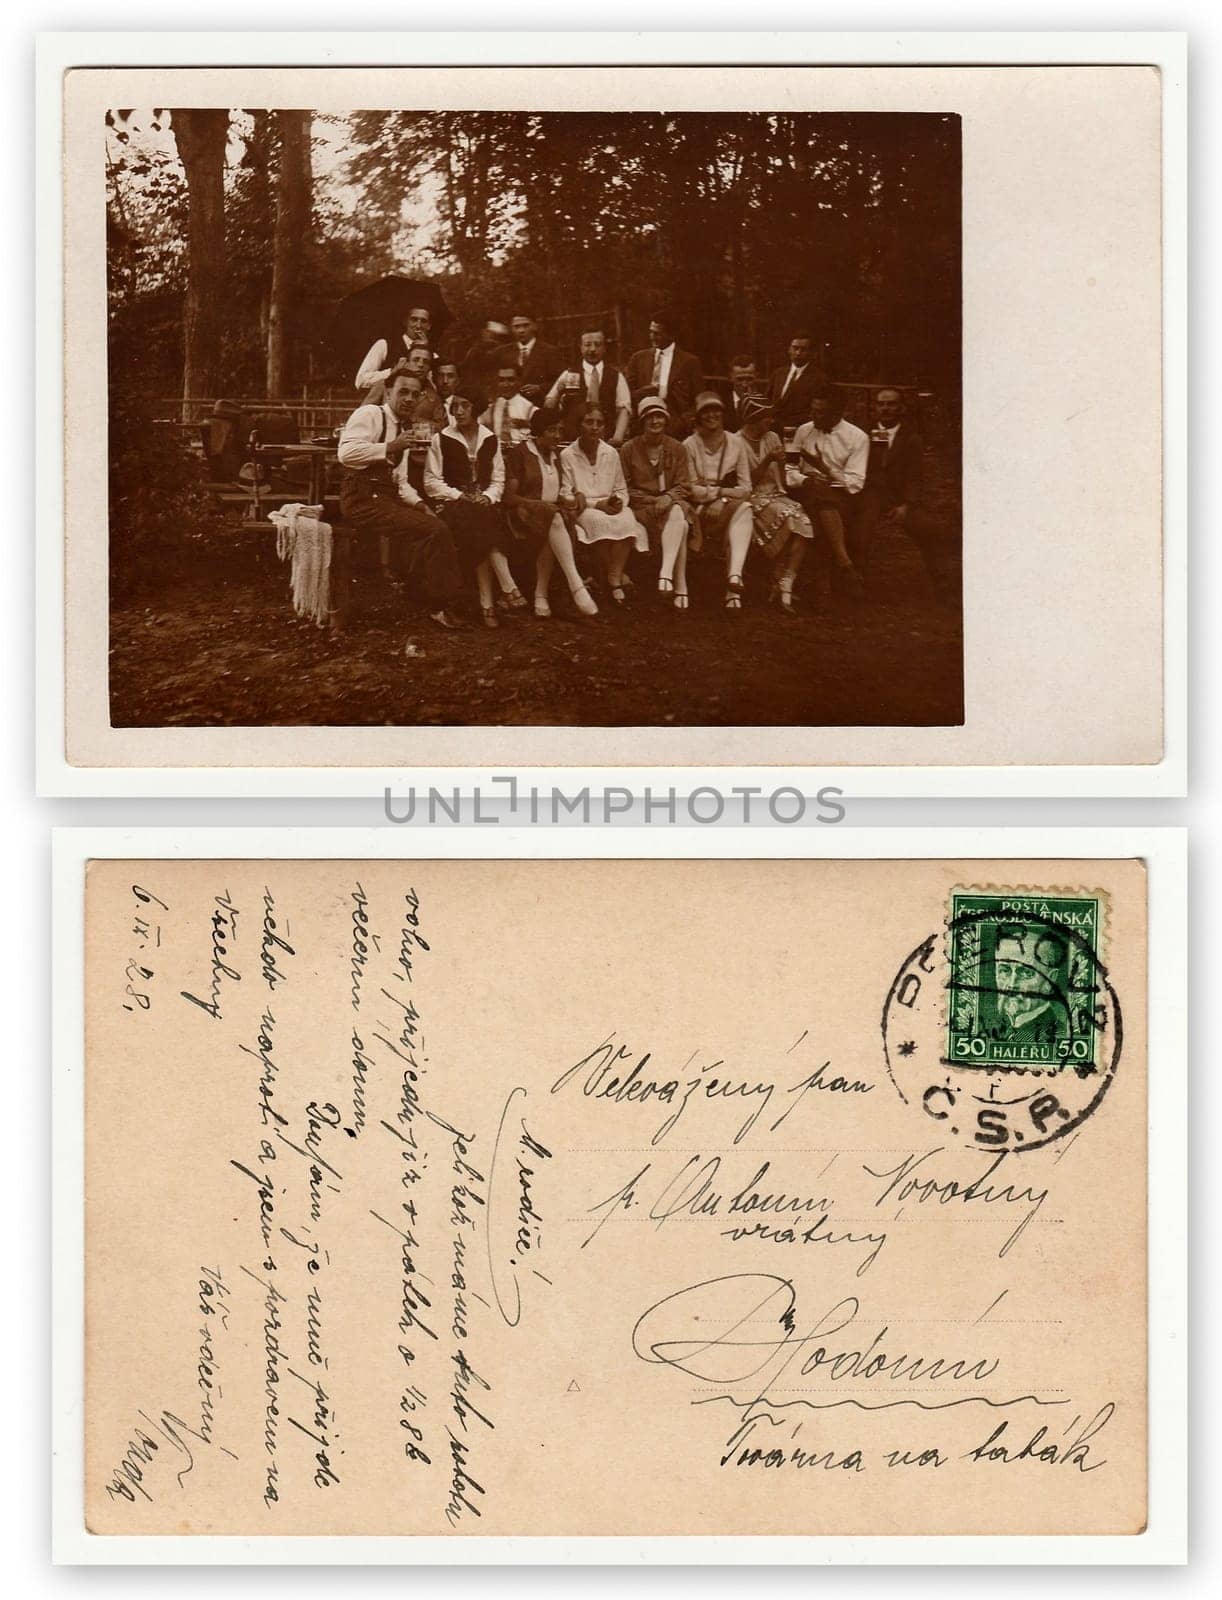 THE CZECHOSLOVAK REPUBLIC, CIRCA 1930s: Front and back of vintage photo. Vintage photo shows group of people in nature, circa 1930s